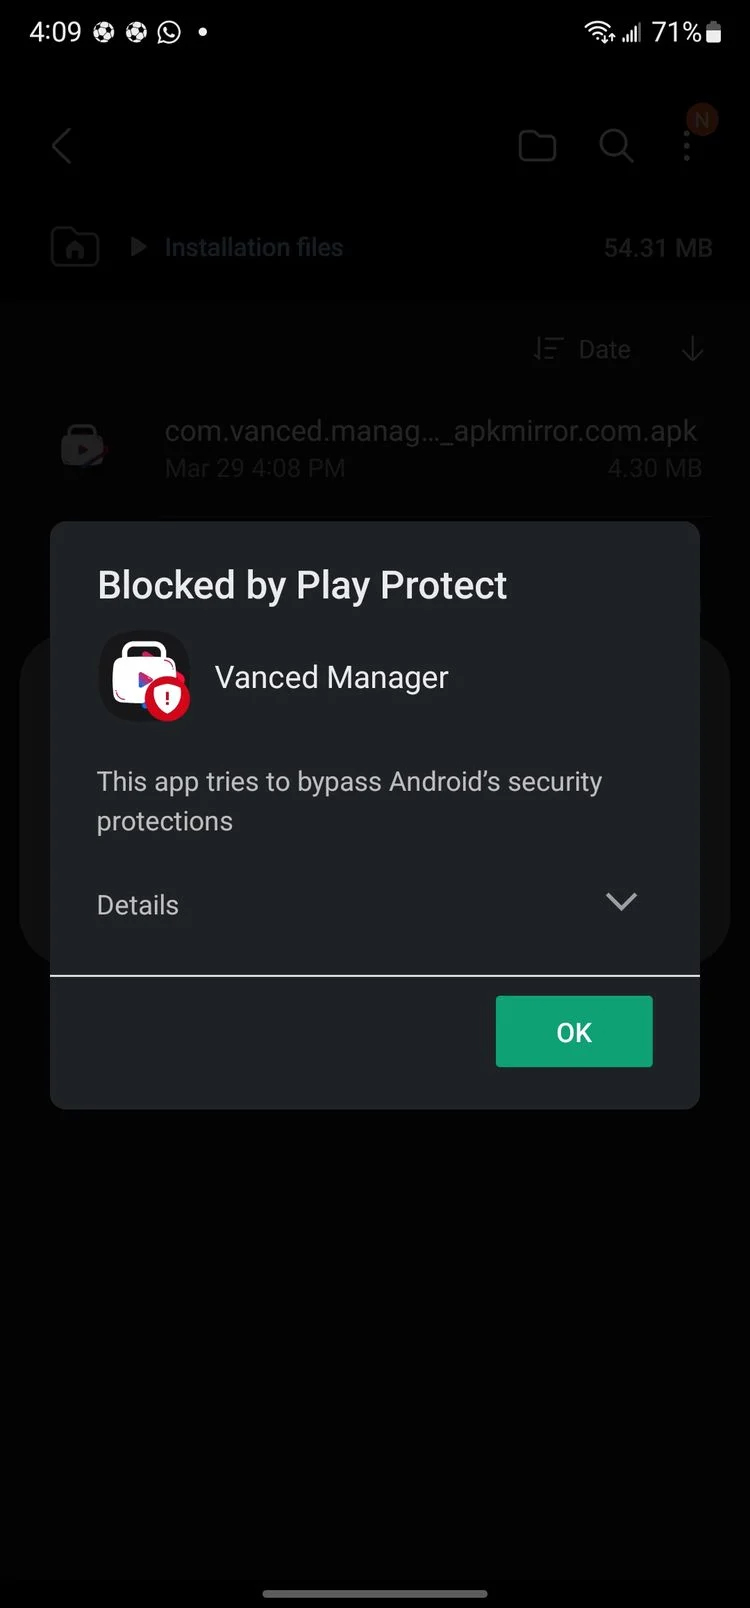 Google Play Protect 警告用户卸载 Vanced Manager 应用